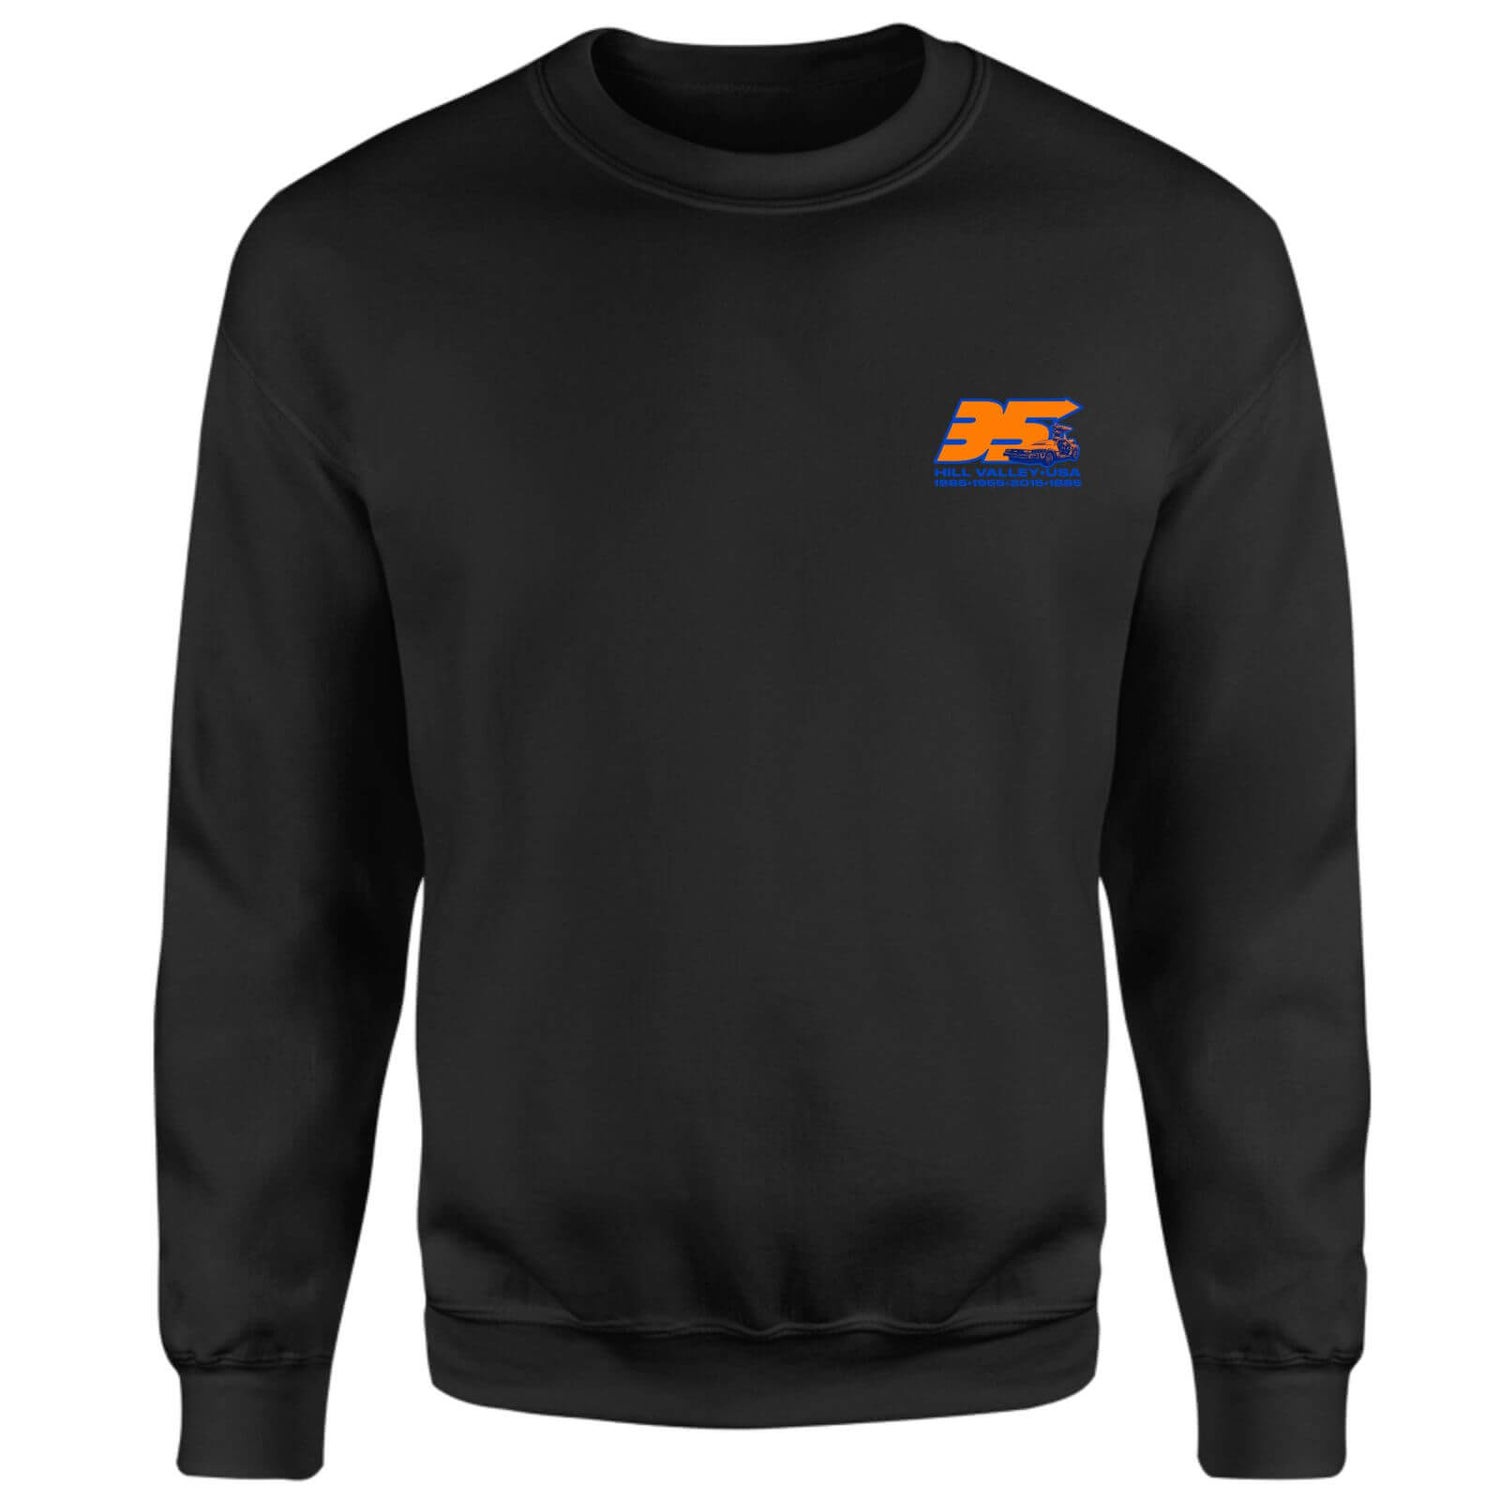 Back To The Future 35 Hill Valley Front Sweatshirt - Black